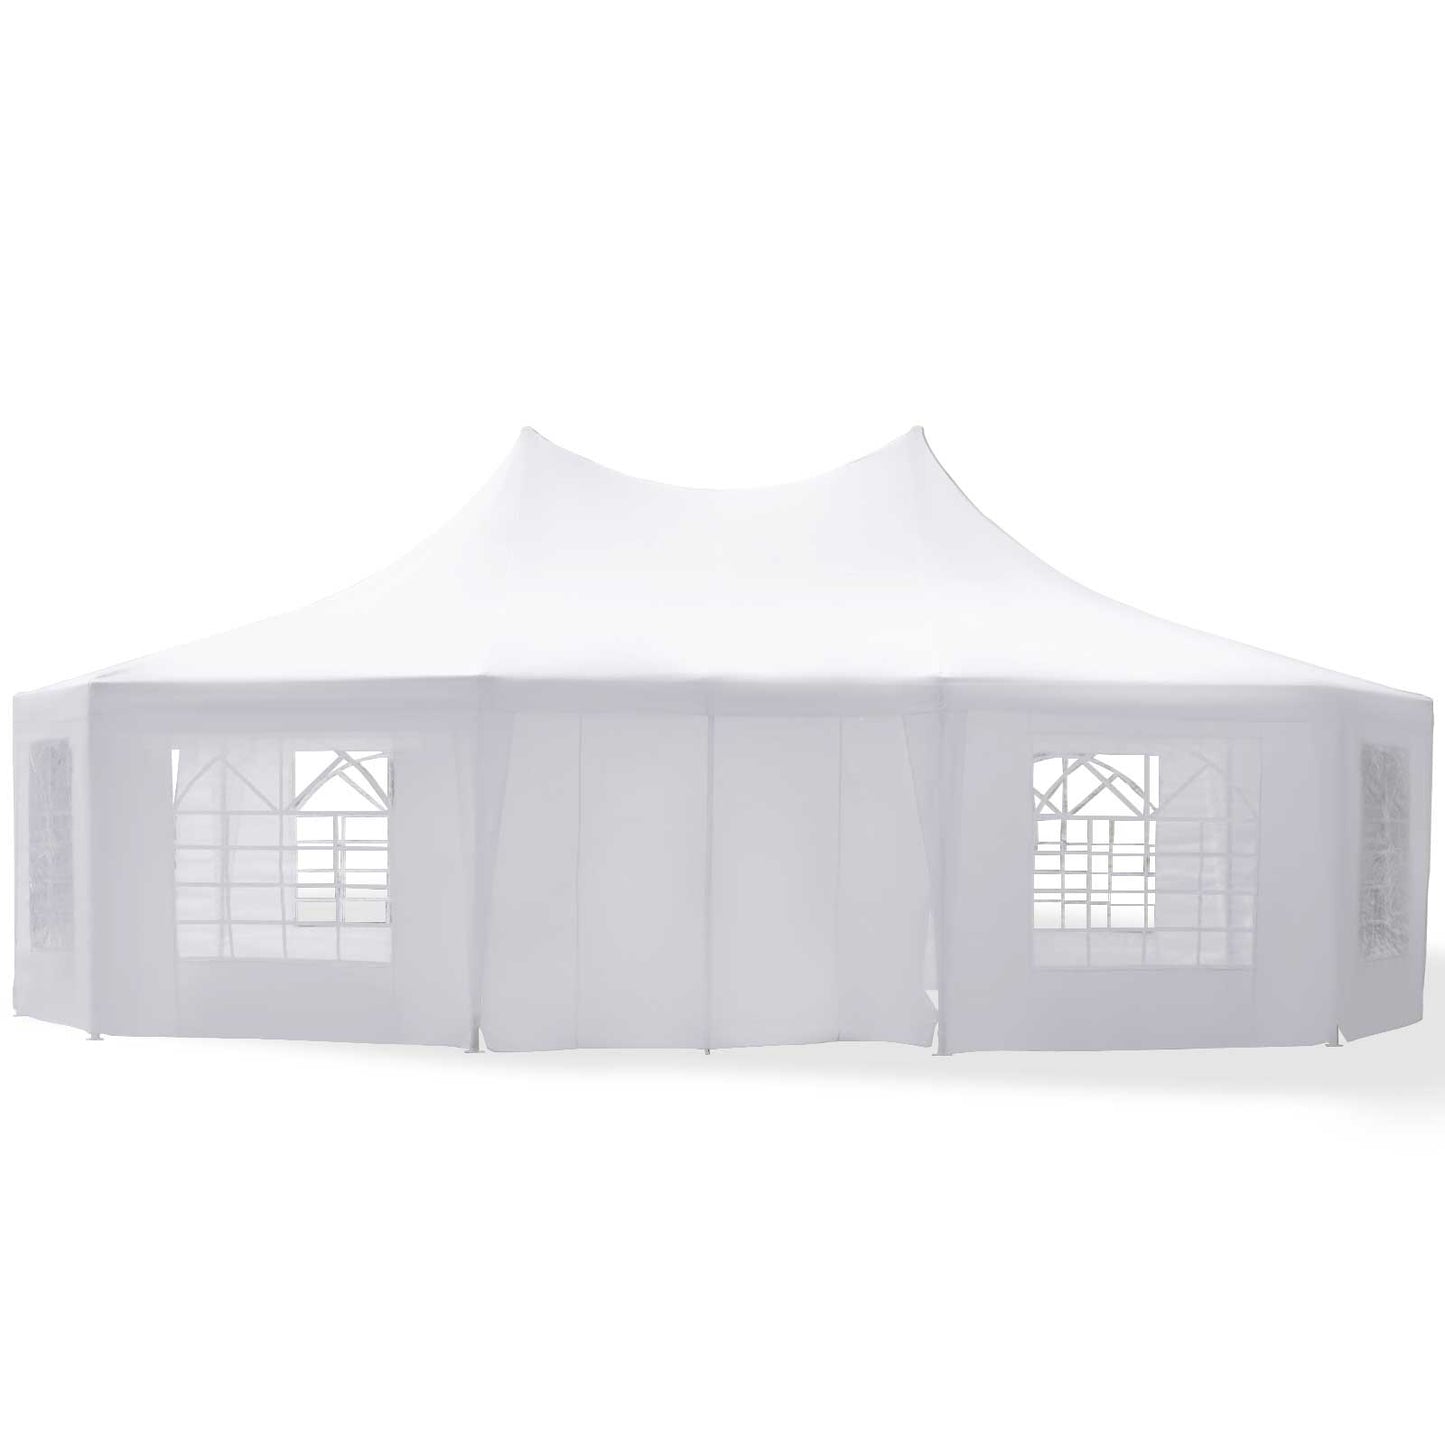 Outsunny Garden Party Tent 8.9x6.5 m Waterproof Marquee Canopy White 10 Sides Decagonal Gazebo Wedding Canopy Outdoor Heavy Duty Metal Frame